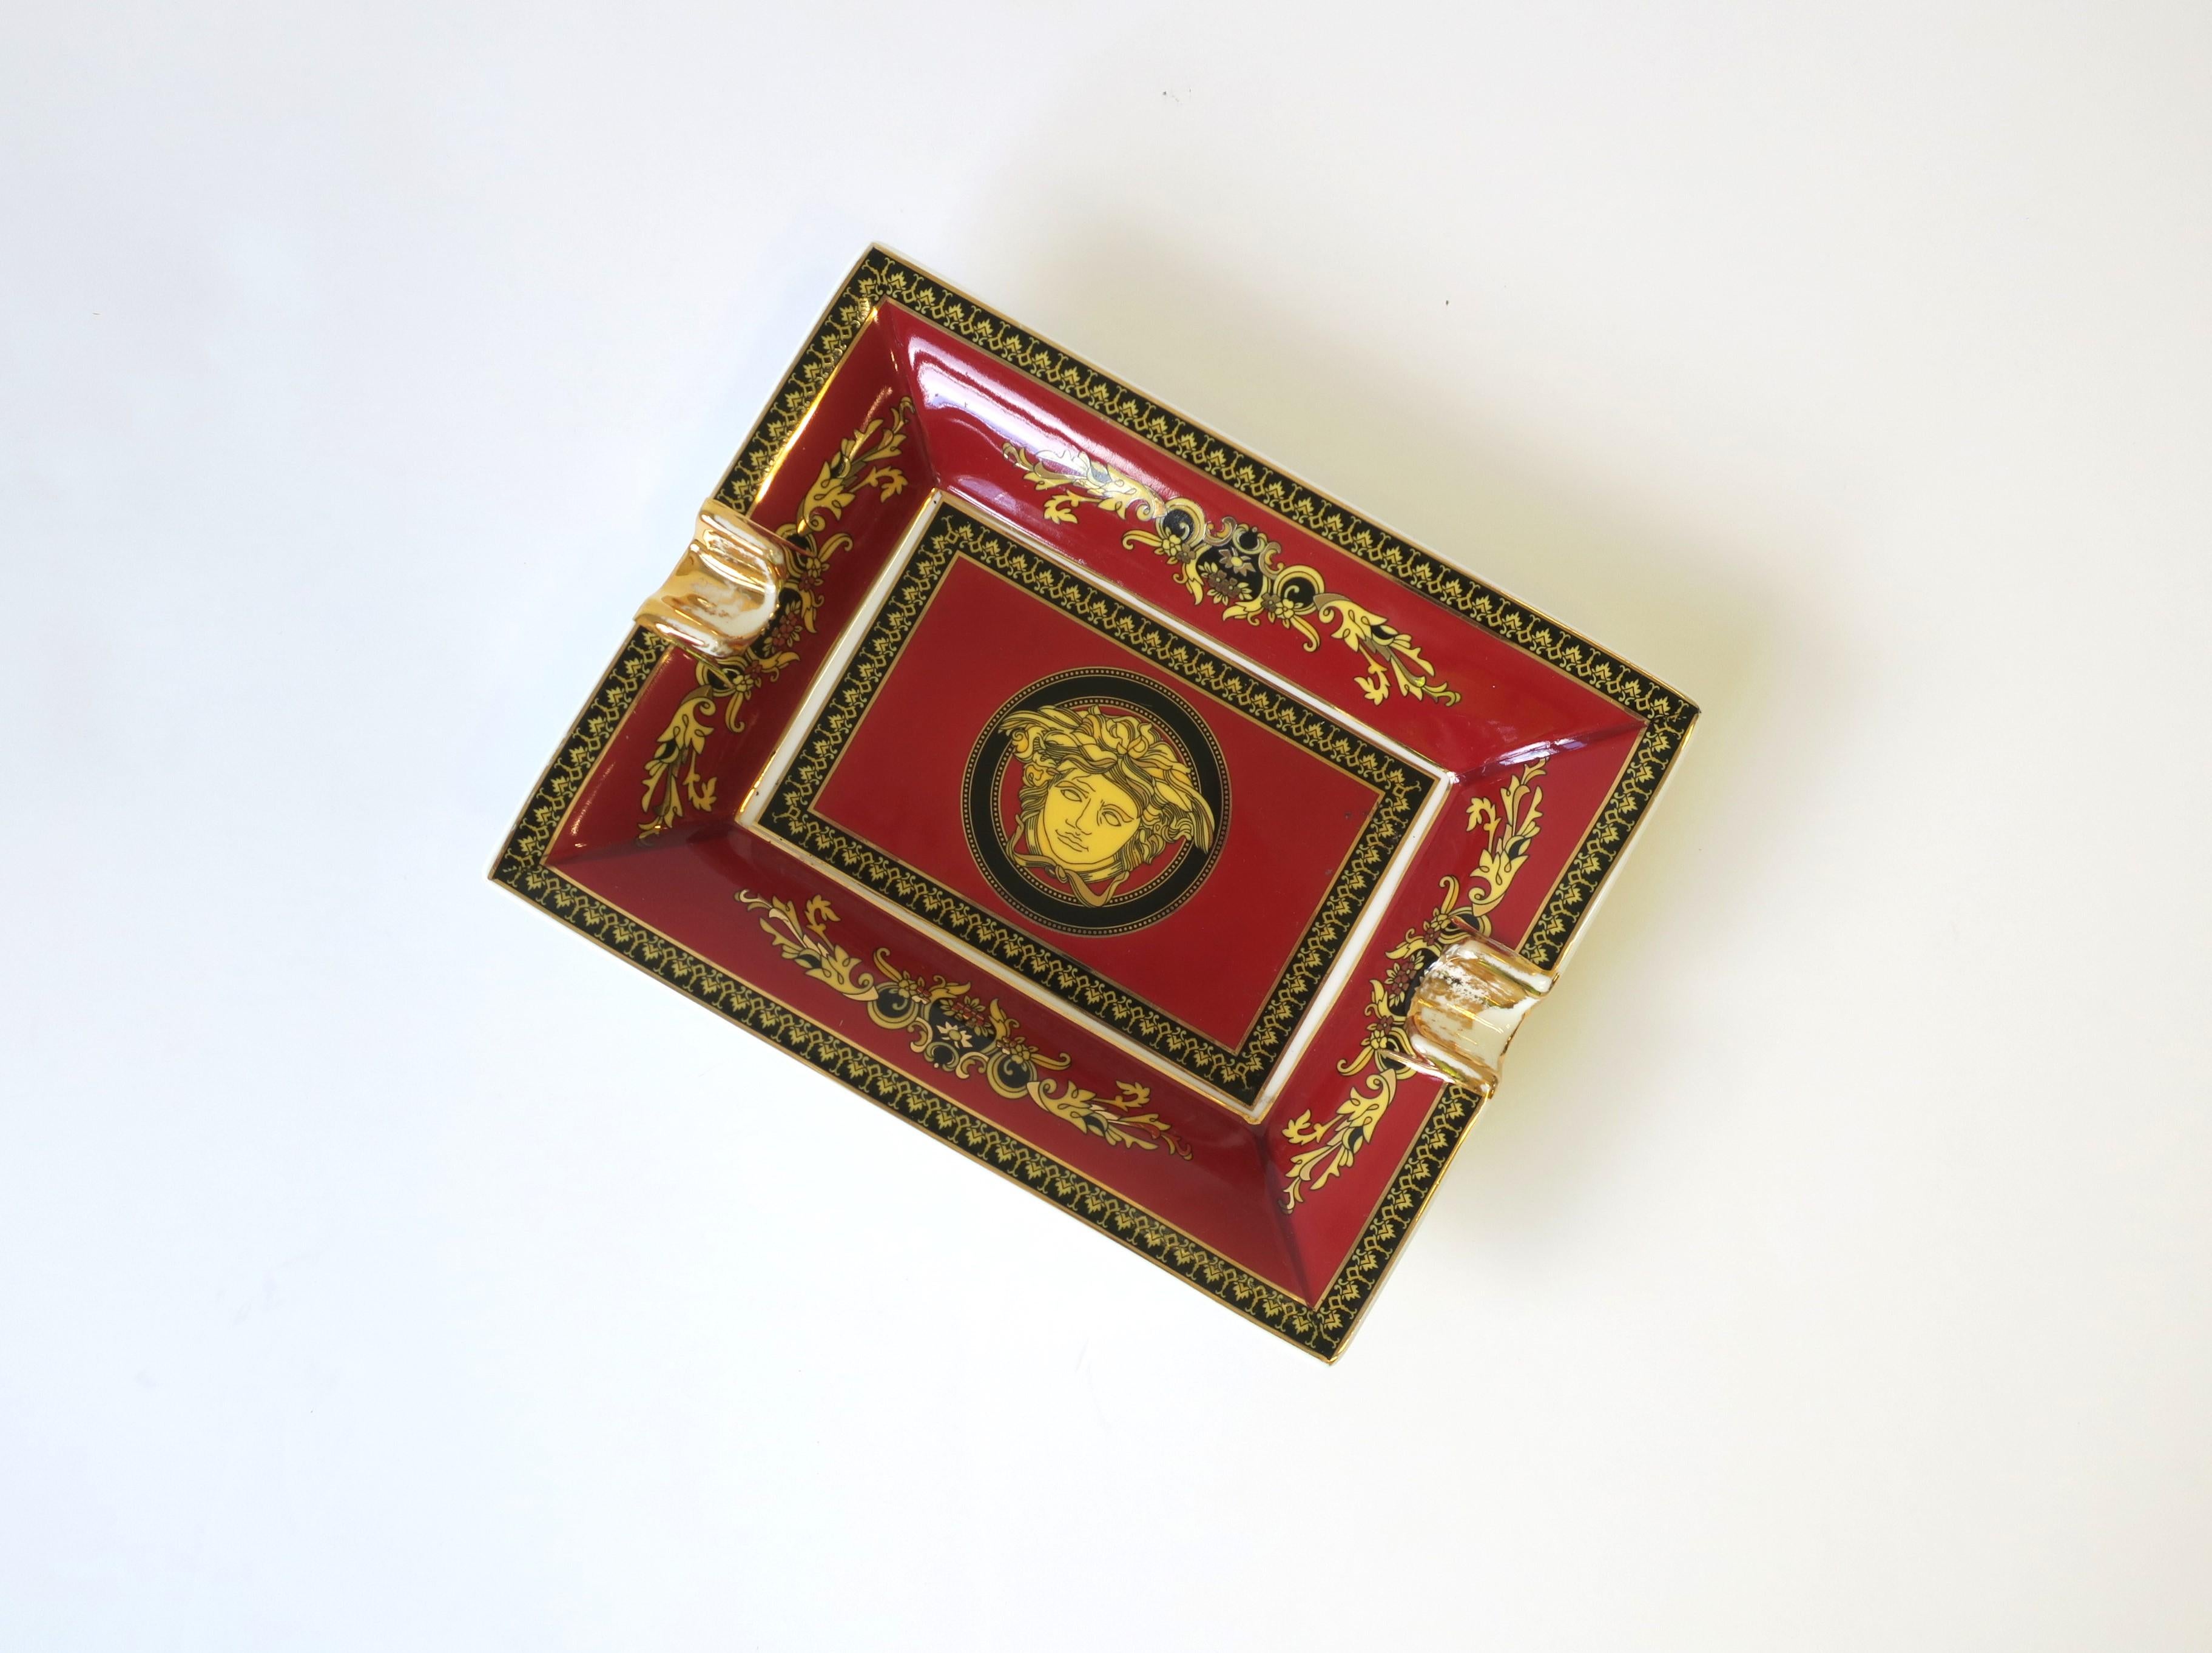 Greco Roman Versace Medusa Porcelain Catchall Tray Dish or Ashtray in Red Burgundy & Gold